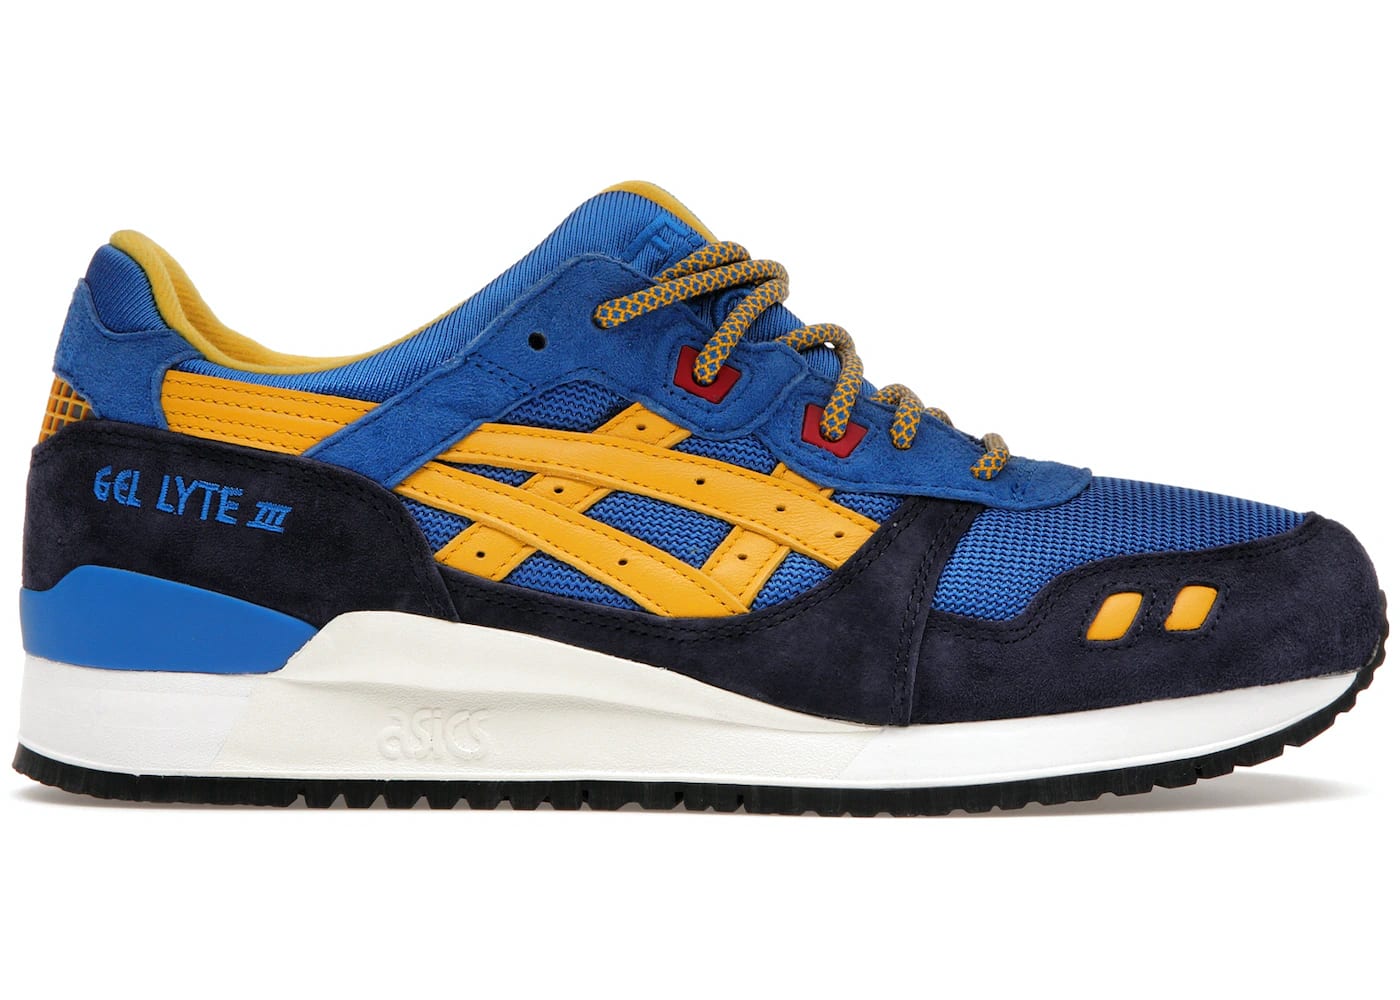 ASICS Gel-Lyte III '07 Remastered Kith Marvel X-Men Cyclops Opened Box (Trading Card Not Included)